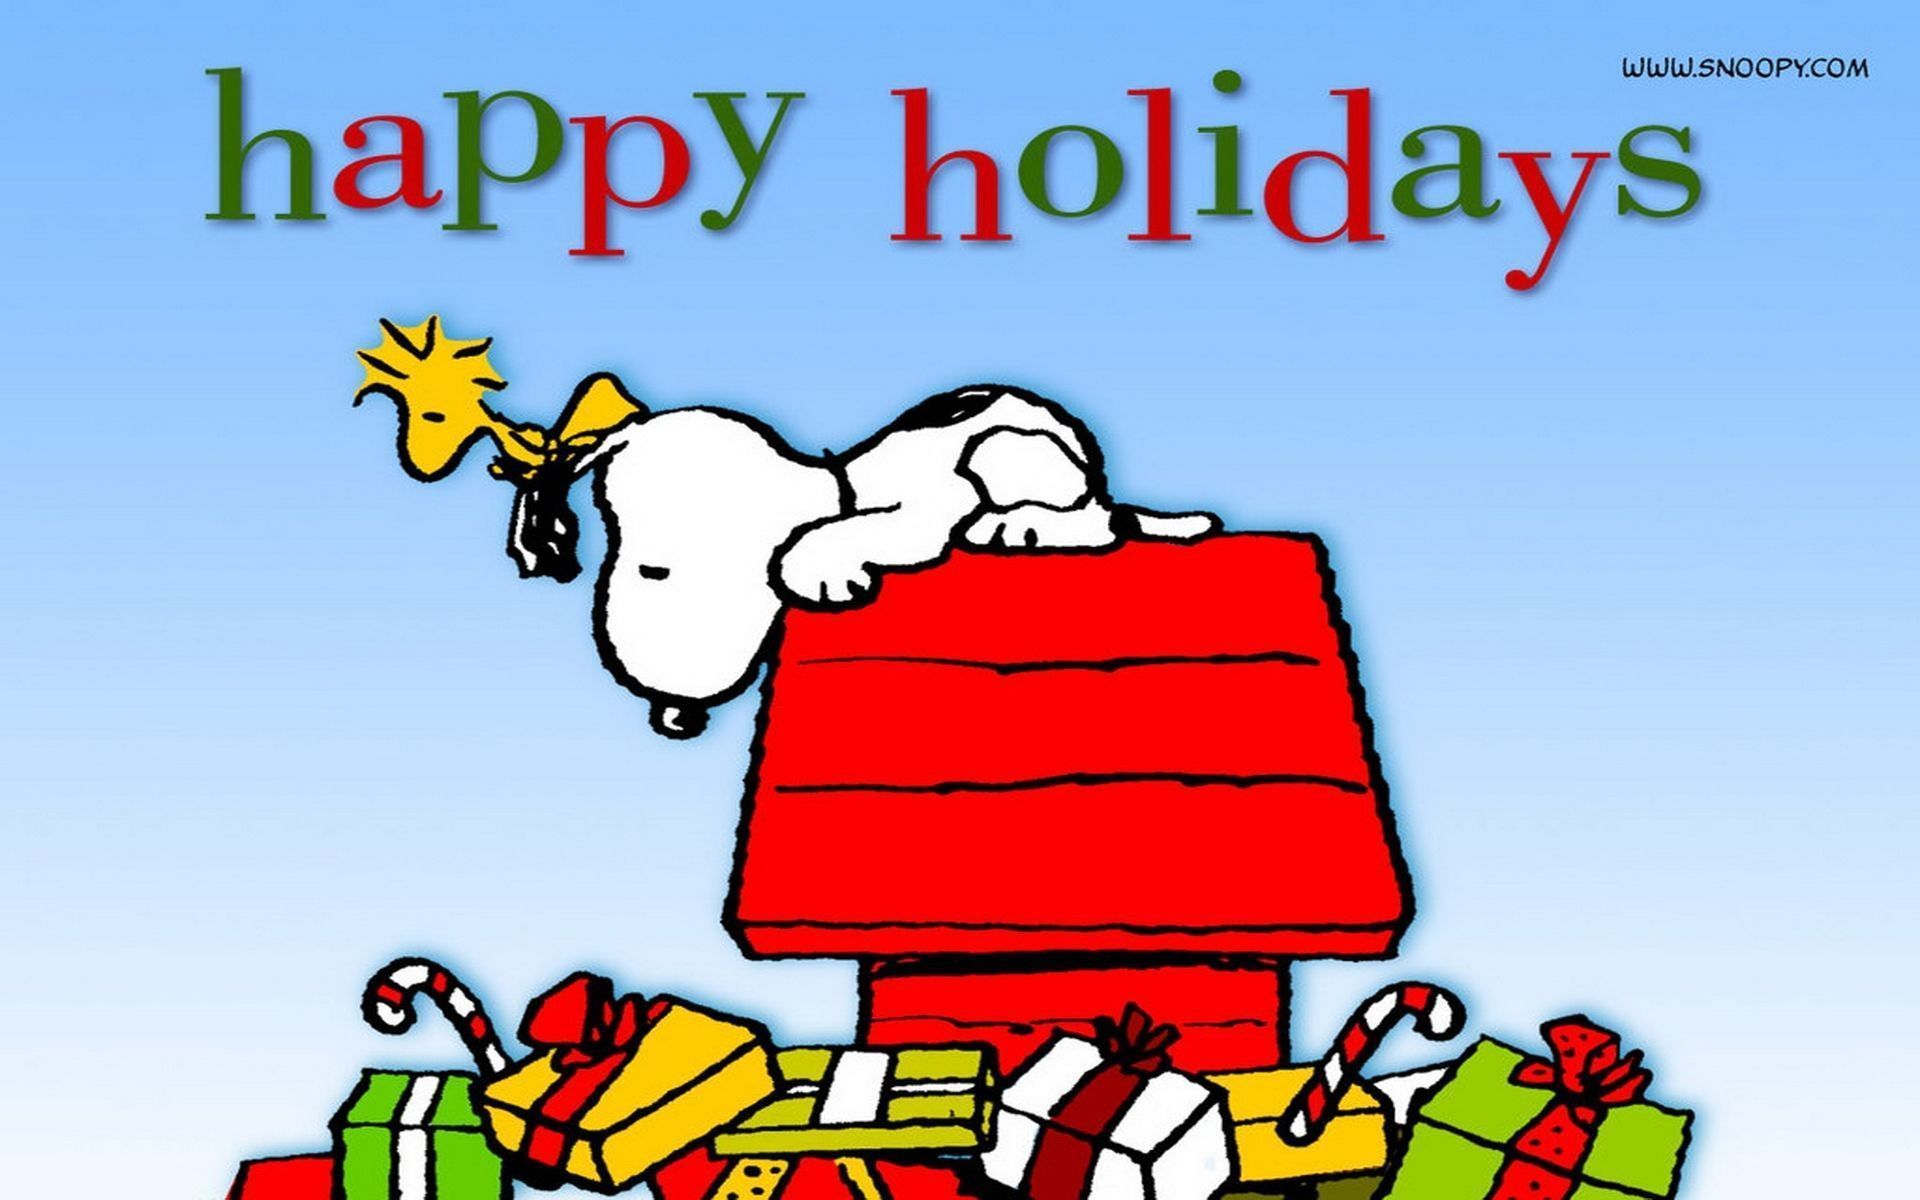 Snoopy happy holidays wallpaper 11923 - Snoopy, Charlie Brown